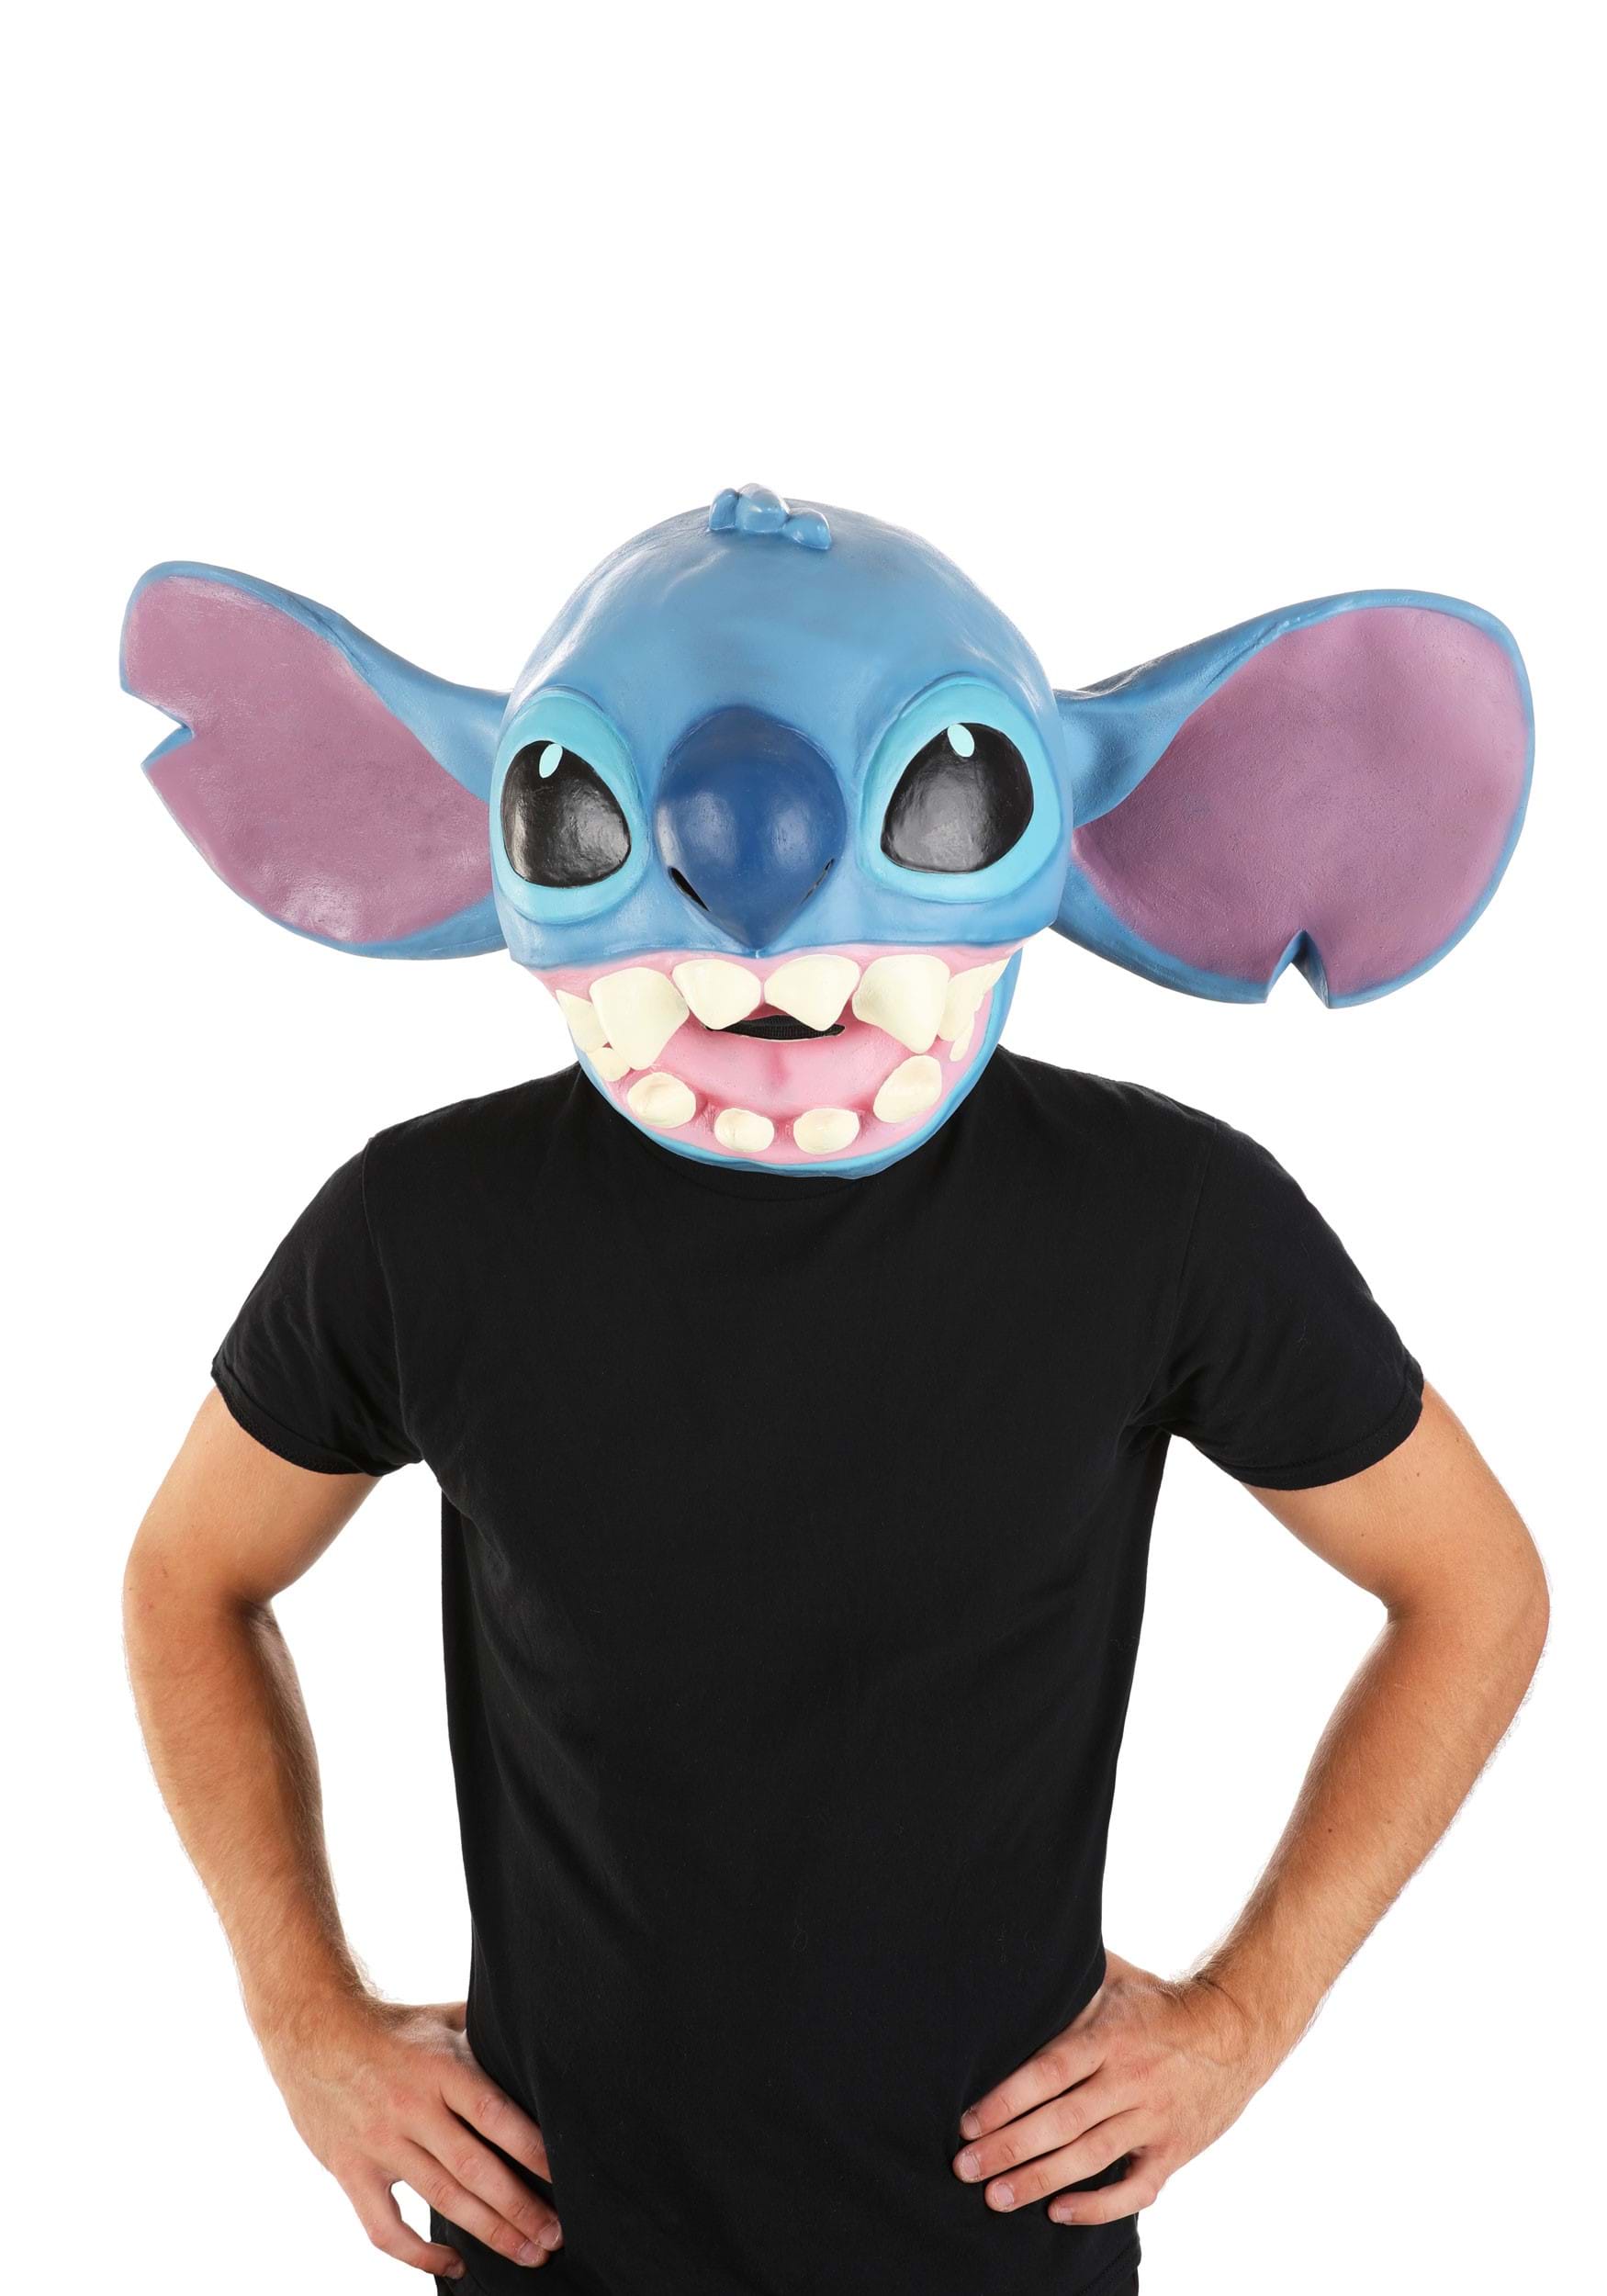 Image of Adult Deluxe Stitch Latex Mask | Disney Accessories ID EL453520-ST